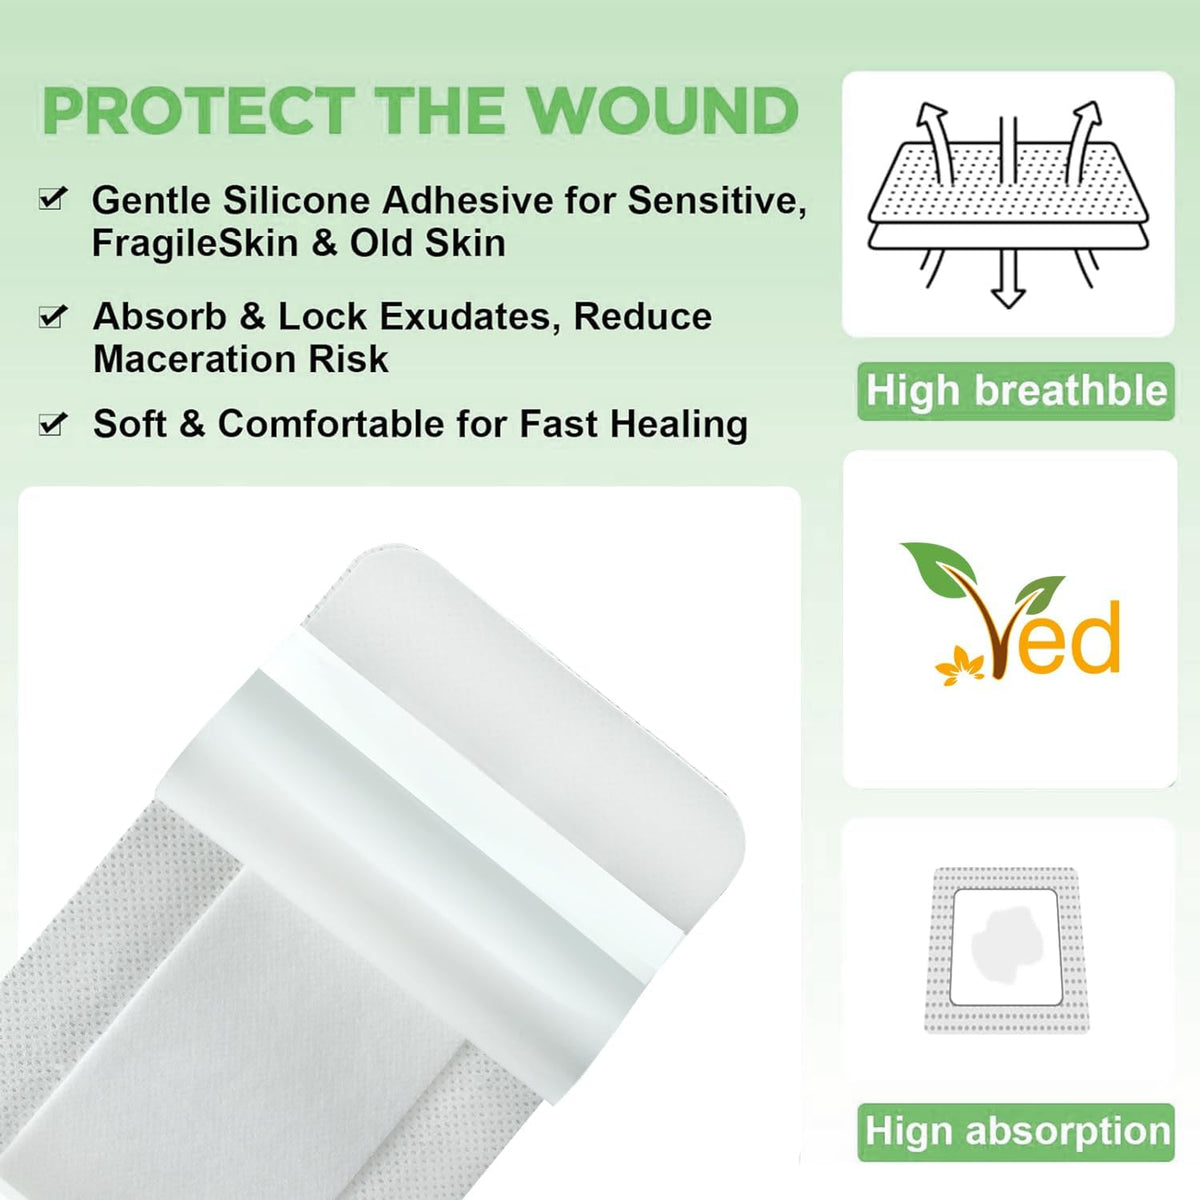 VED Dermapore Adhesive Wound Dressing- Suitable for cuts and grazes, Diabetic Leg ulcers, venous Leg ulcers, Small Pressure sores- Medium, 9 X 15cm (Pack of 25).